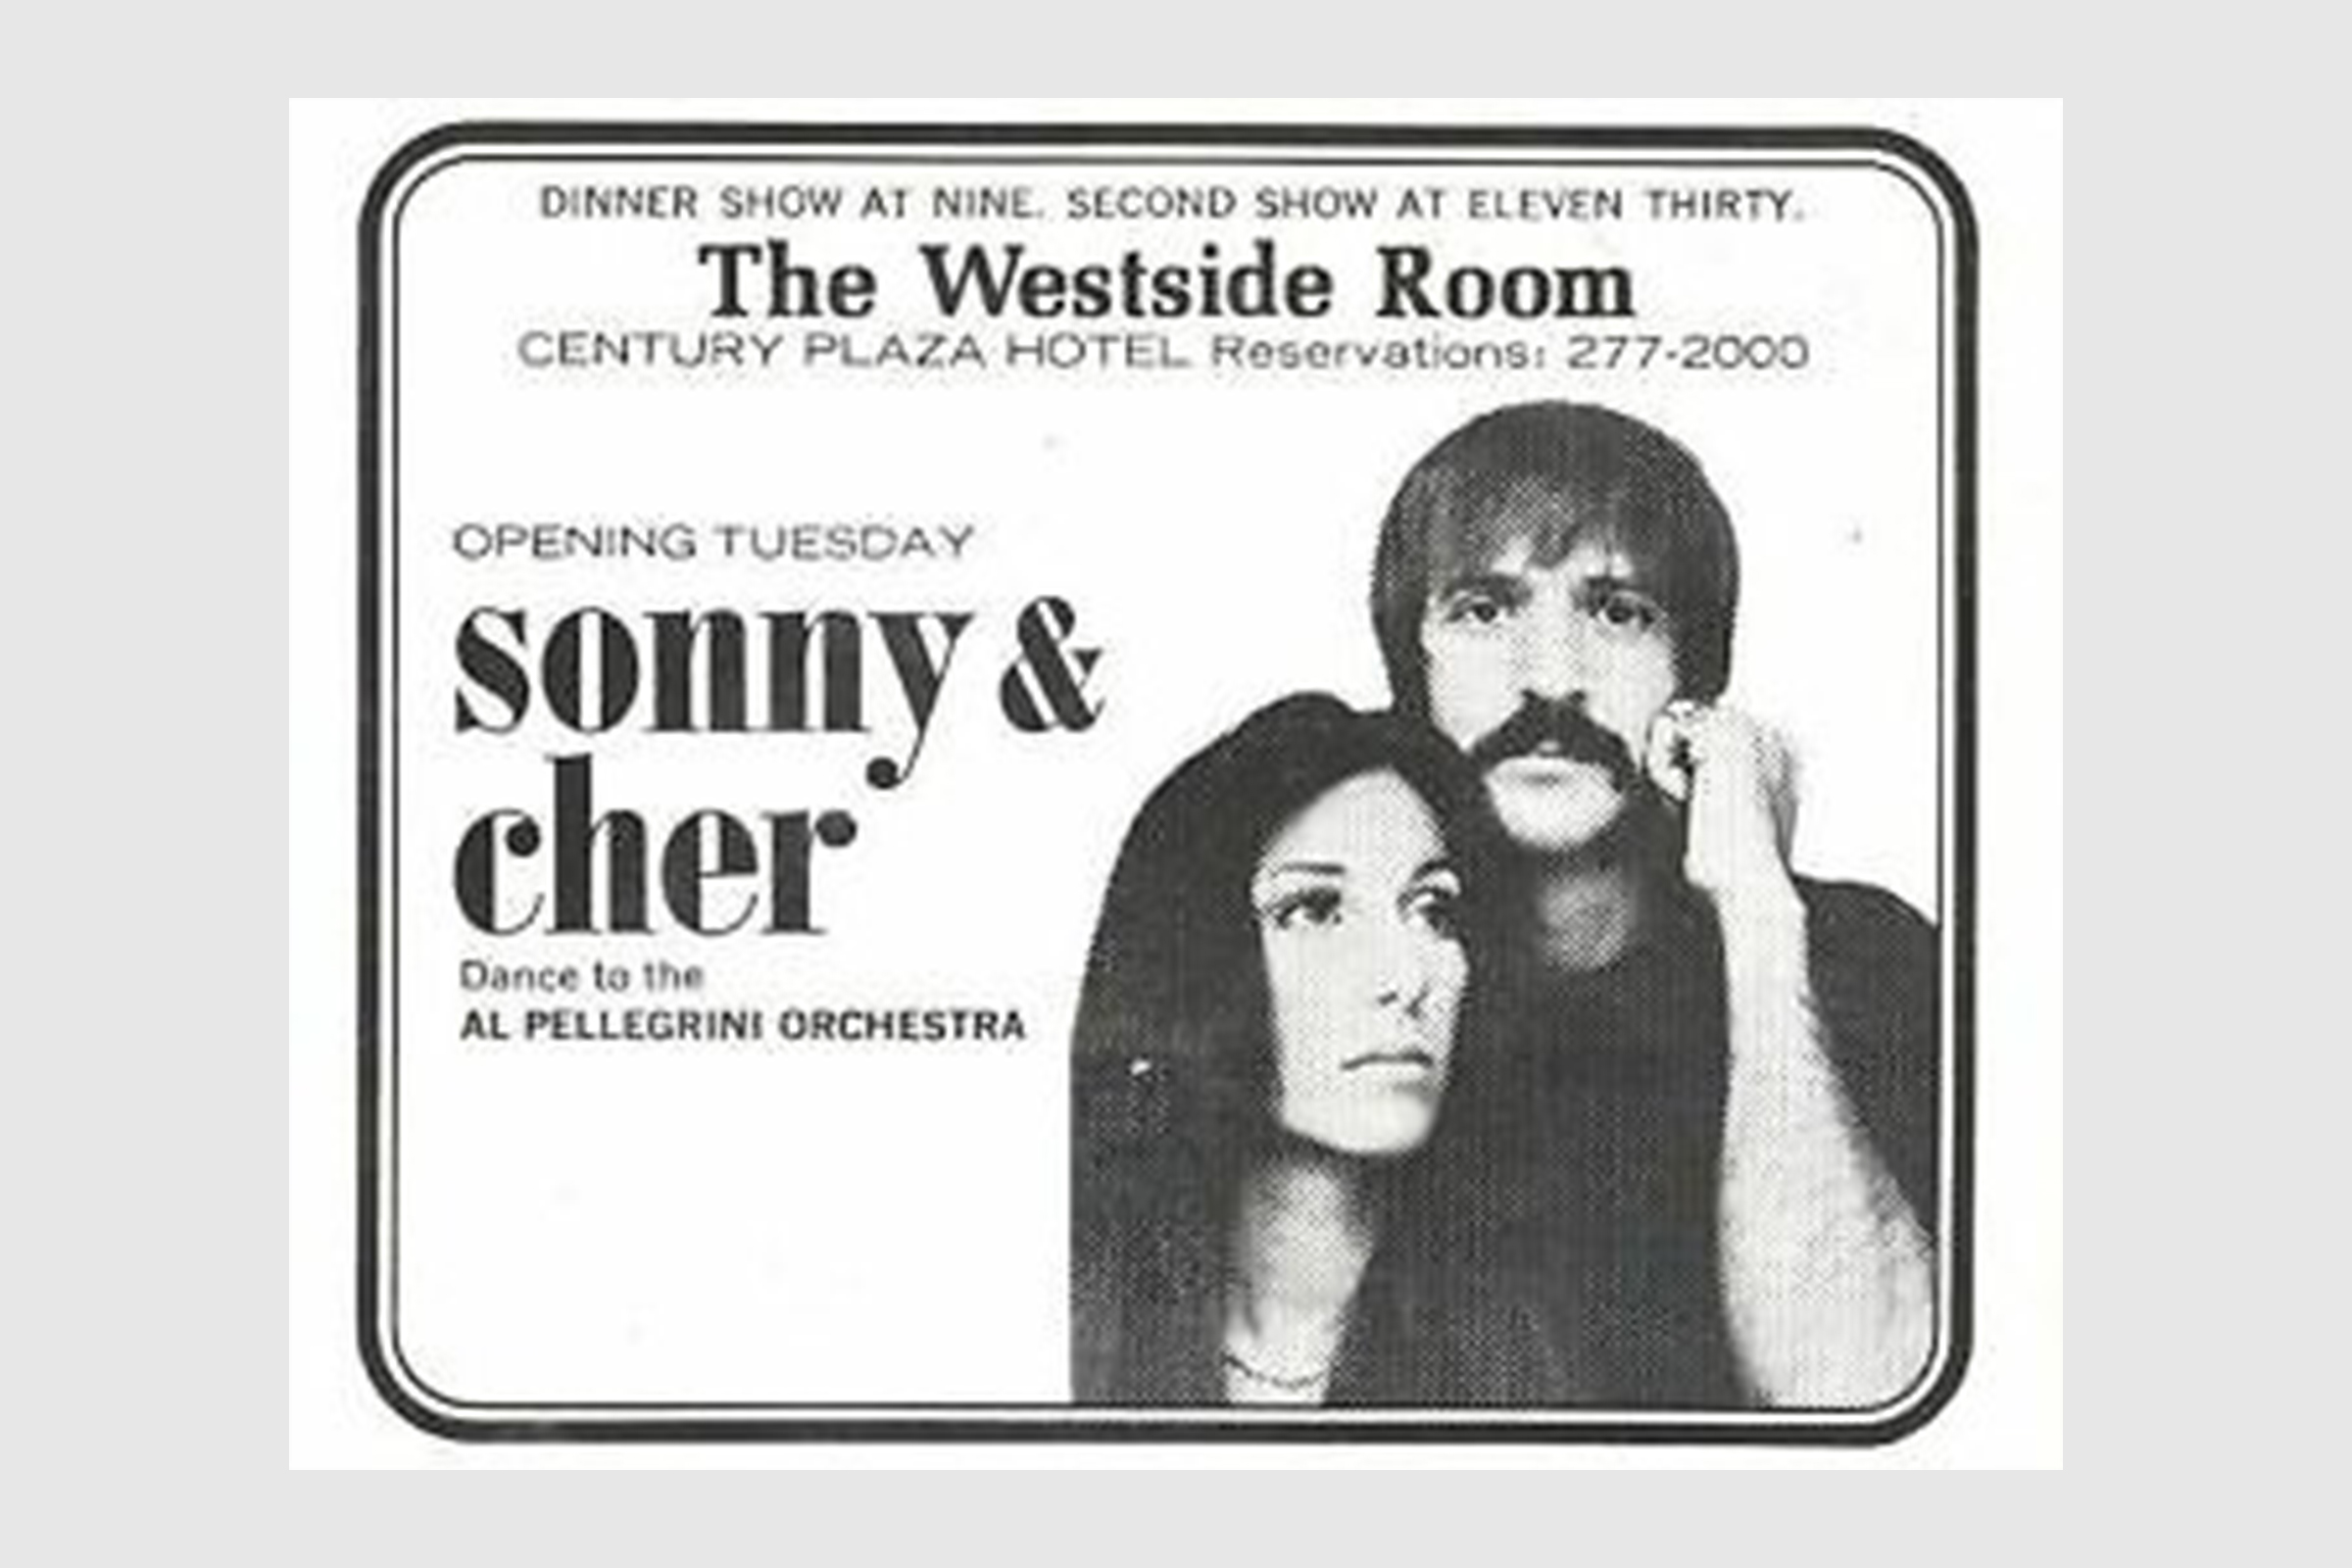 Sonny and Cher performed at the Century Plaza Hotel in the 1970s.